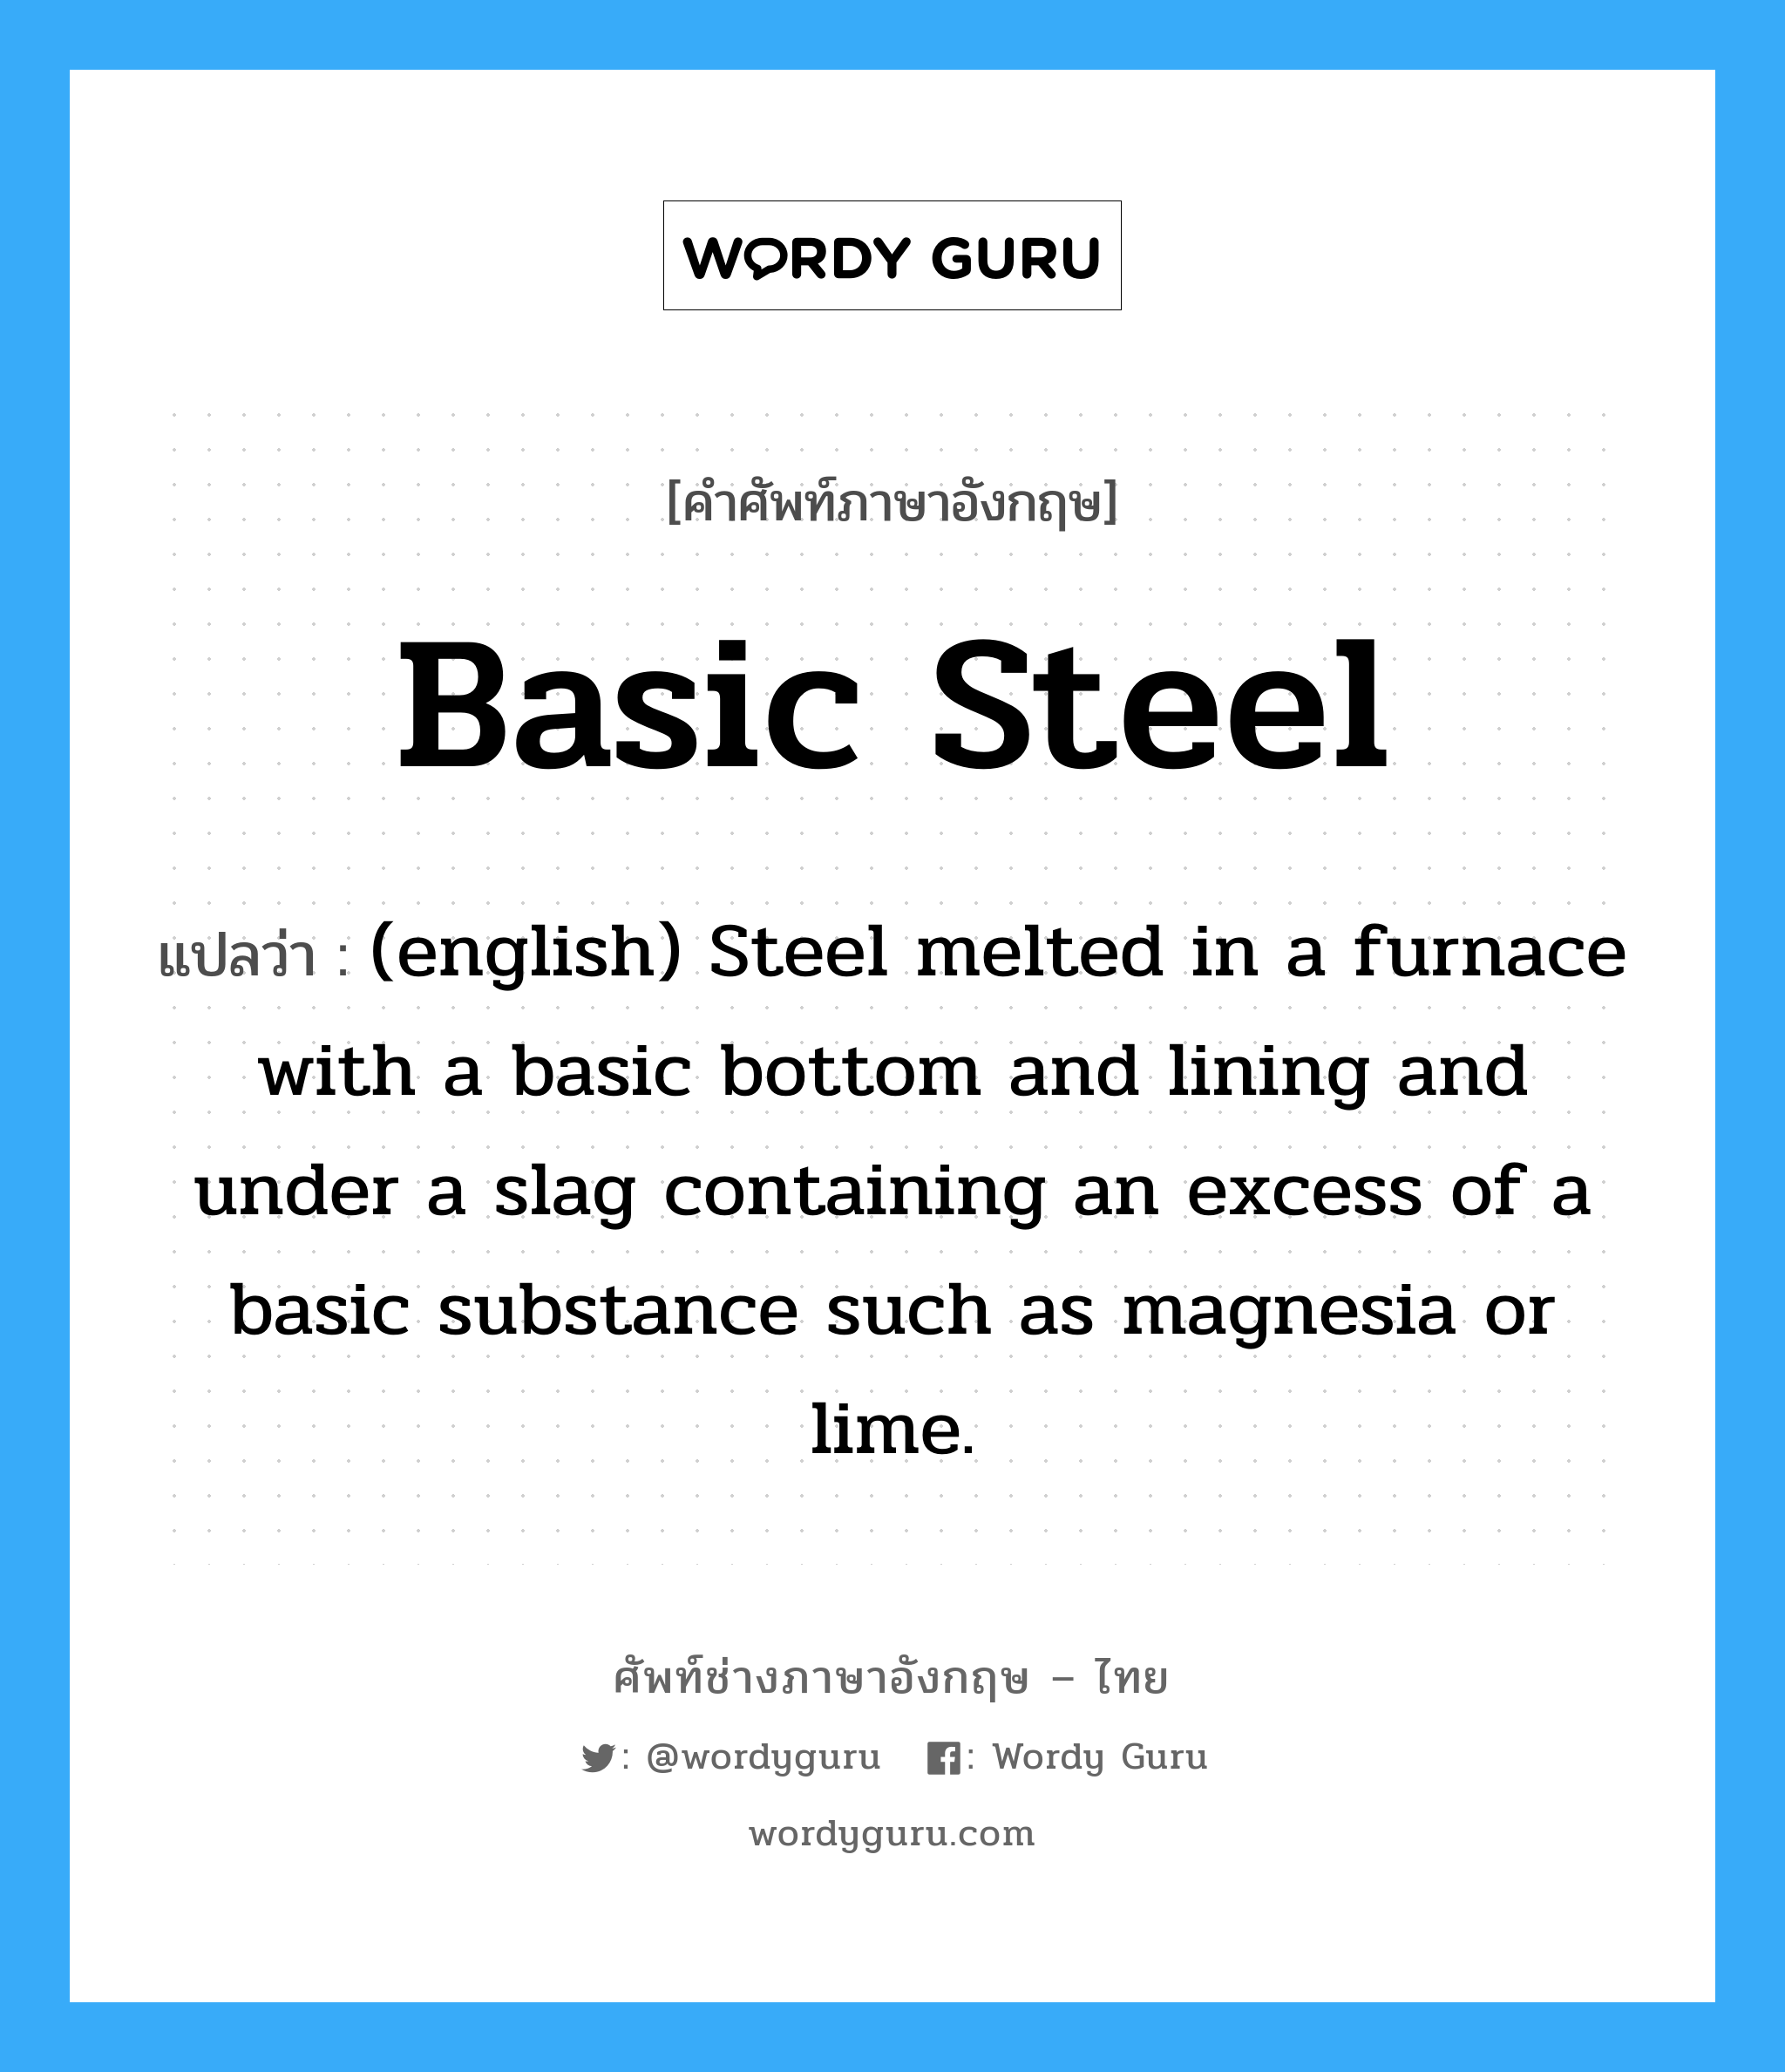 Basic Steel แปลว่า?, คำศัพท์ช่างภาษาอังกฤษ - ไทย Basic Steel คำศัพท์ภาษาอังกฤษ Basic Steel แปลว่า (english) Steel melted in a furnace with a basic bottom and lining and under a slag containing an excess of a basic substance such as magnesia or lime.